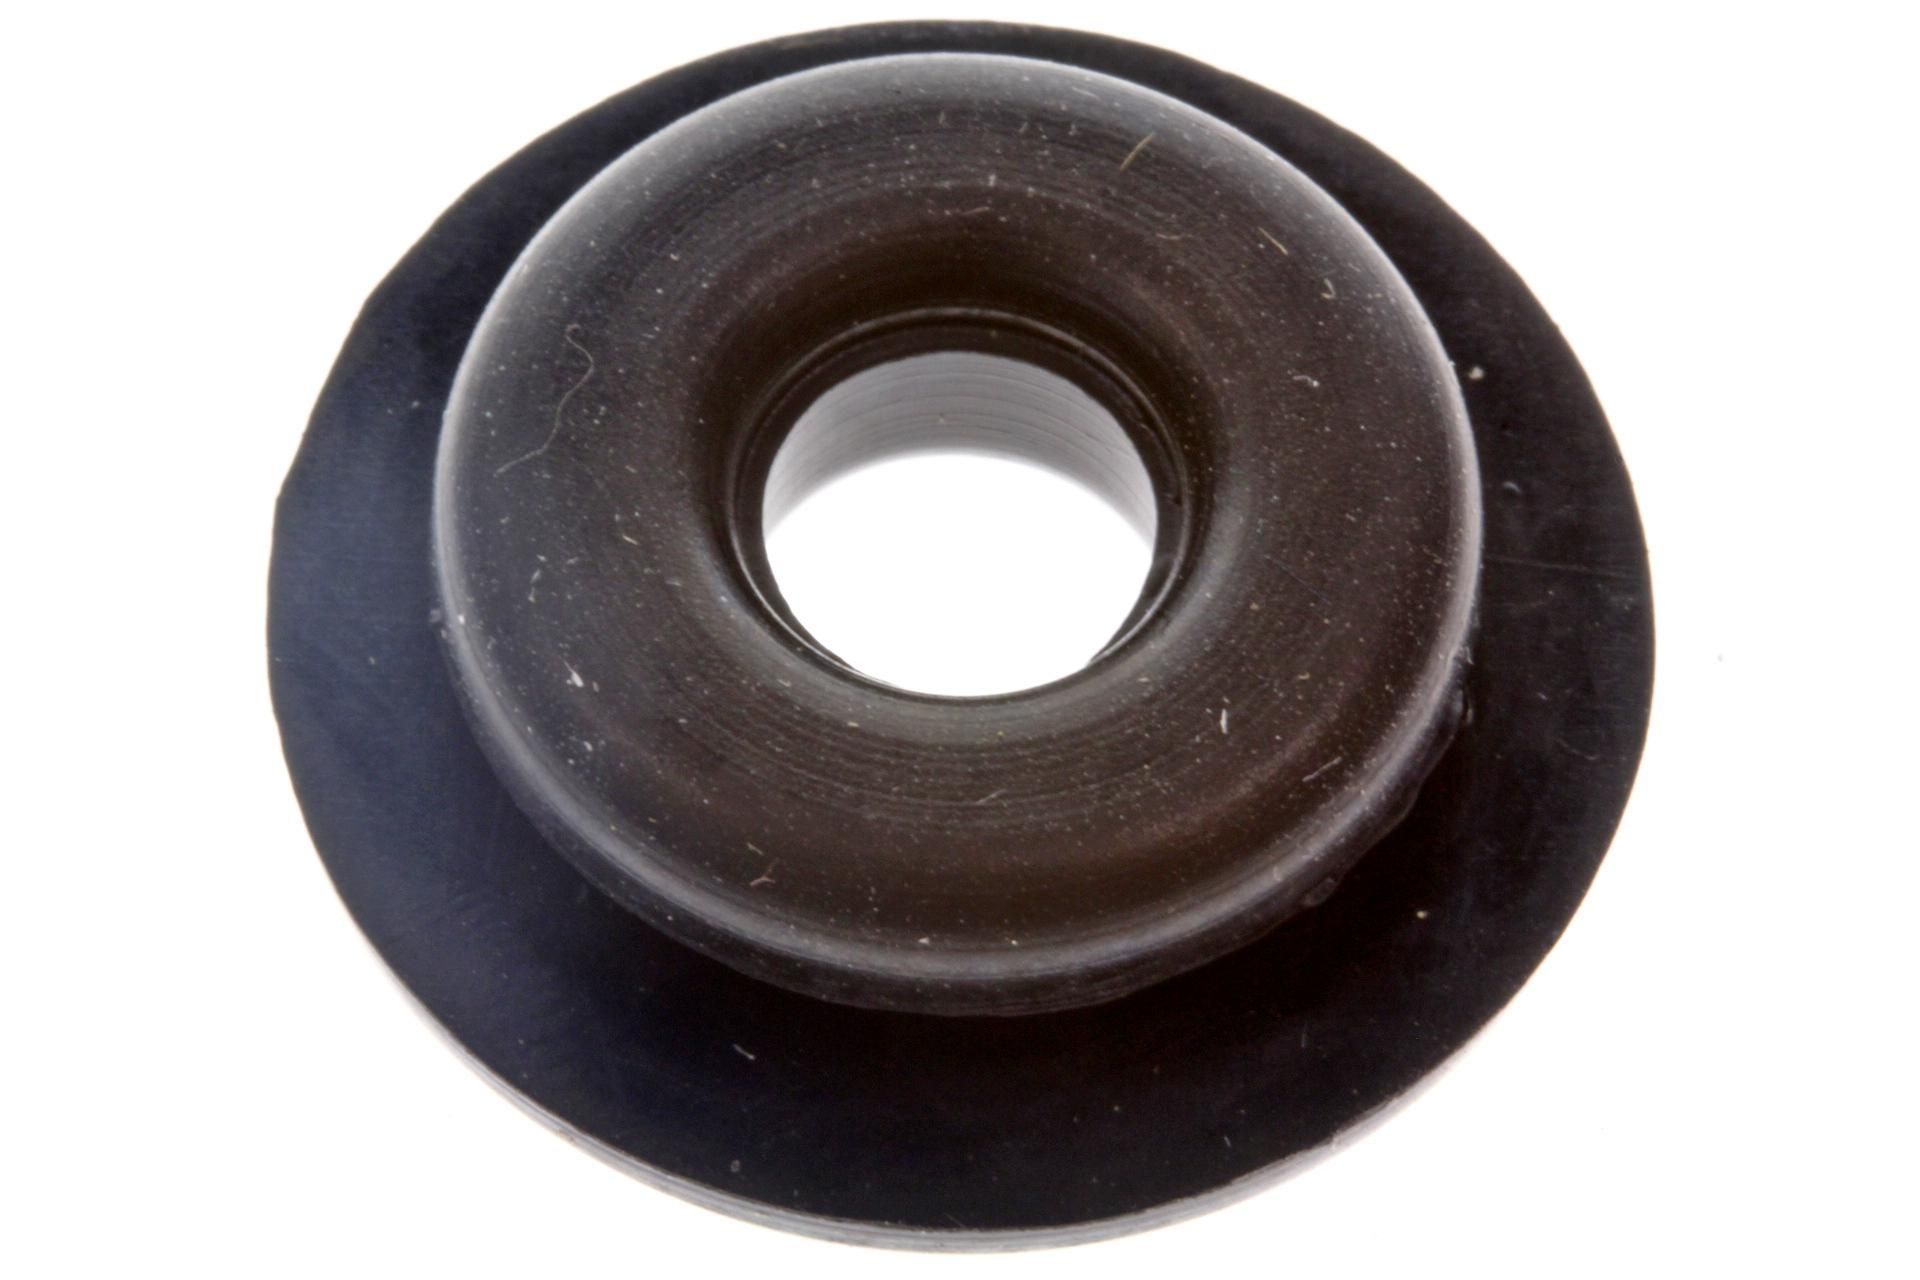 11345-MB0-000 COVER GROMMET